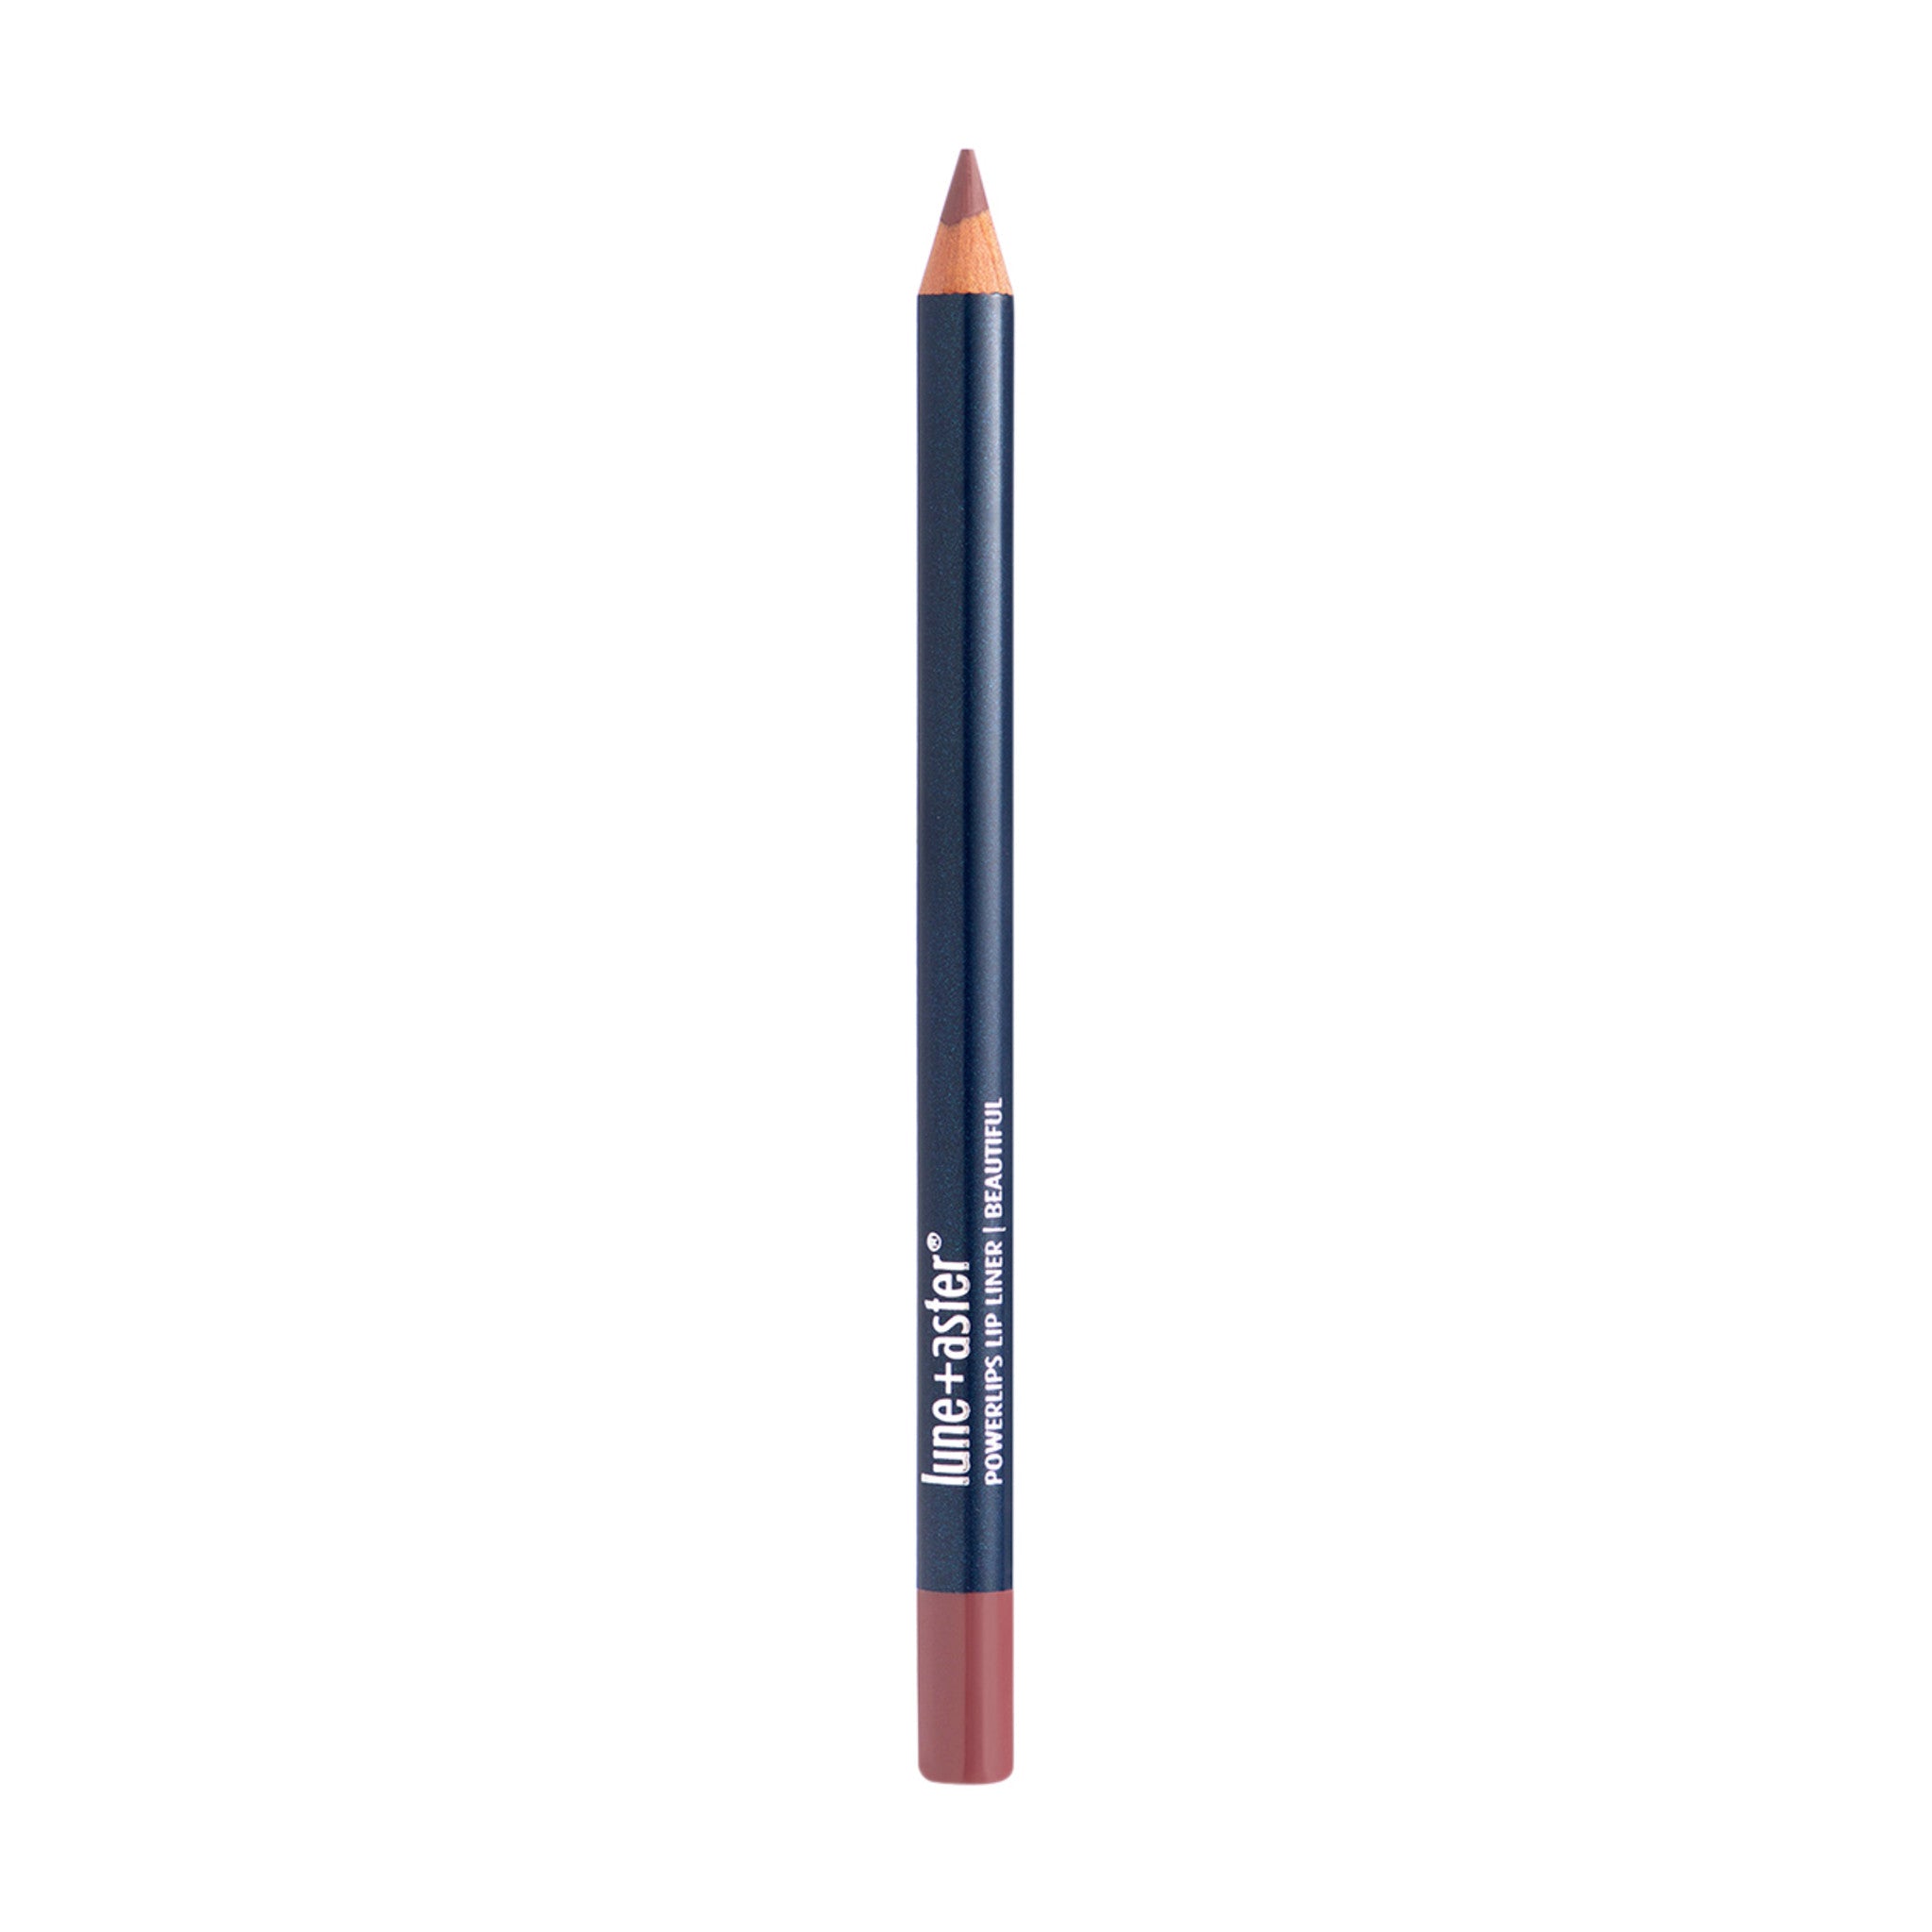 Lune+Aster PowerLips Lip Liner Color/Shade variant: Beautiful main image. This product is in the color nude